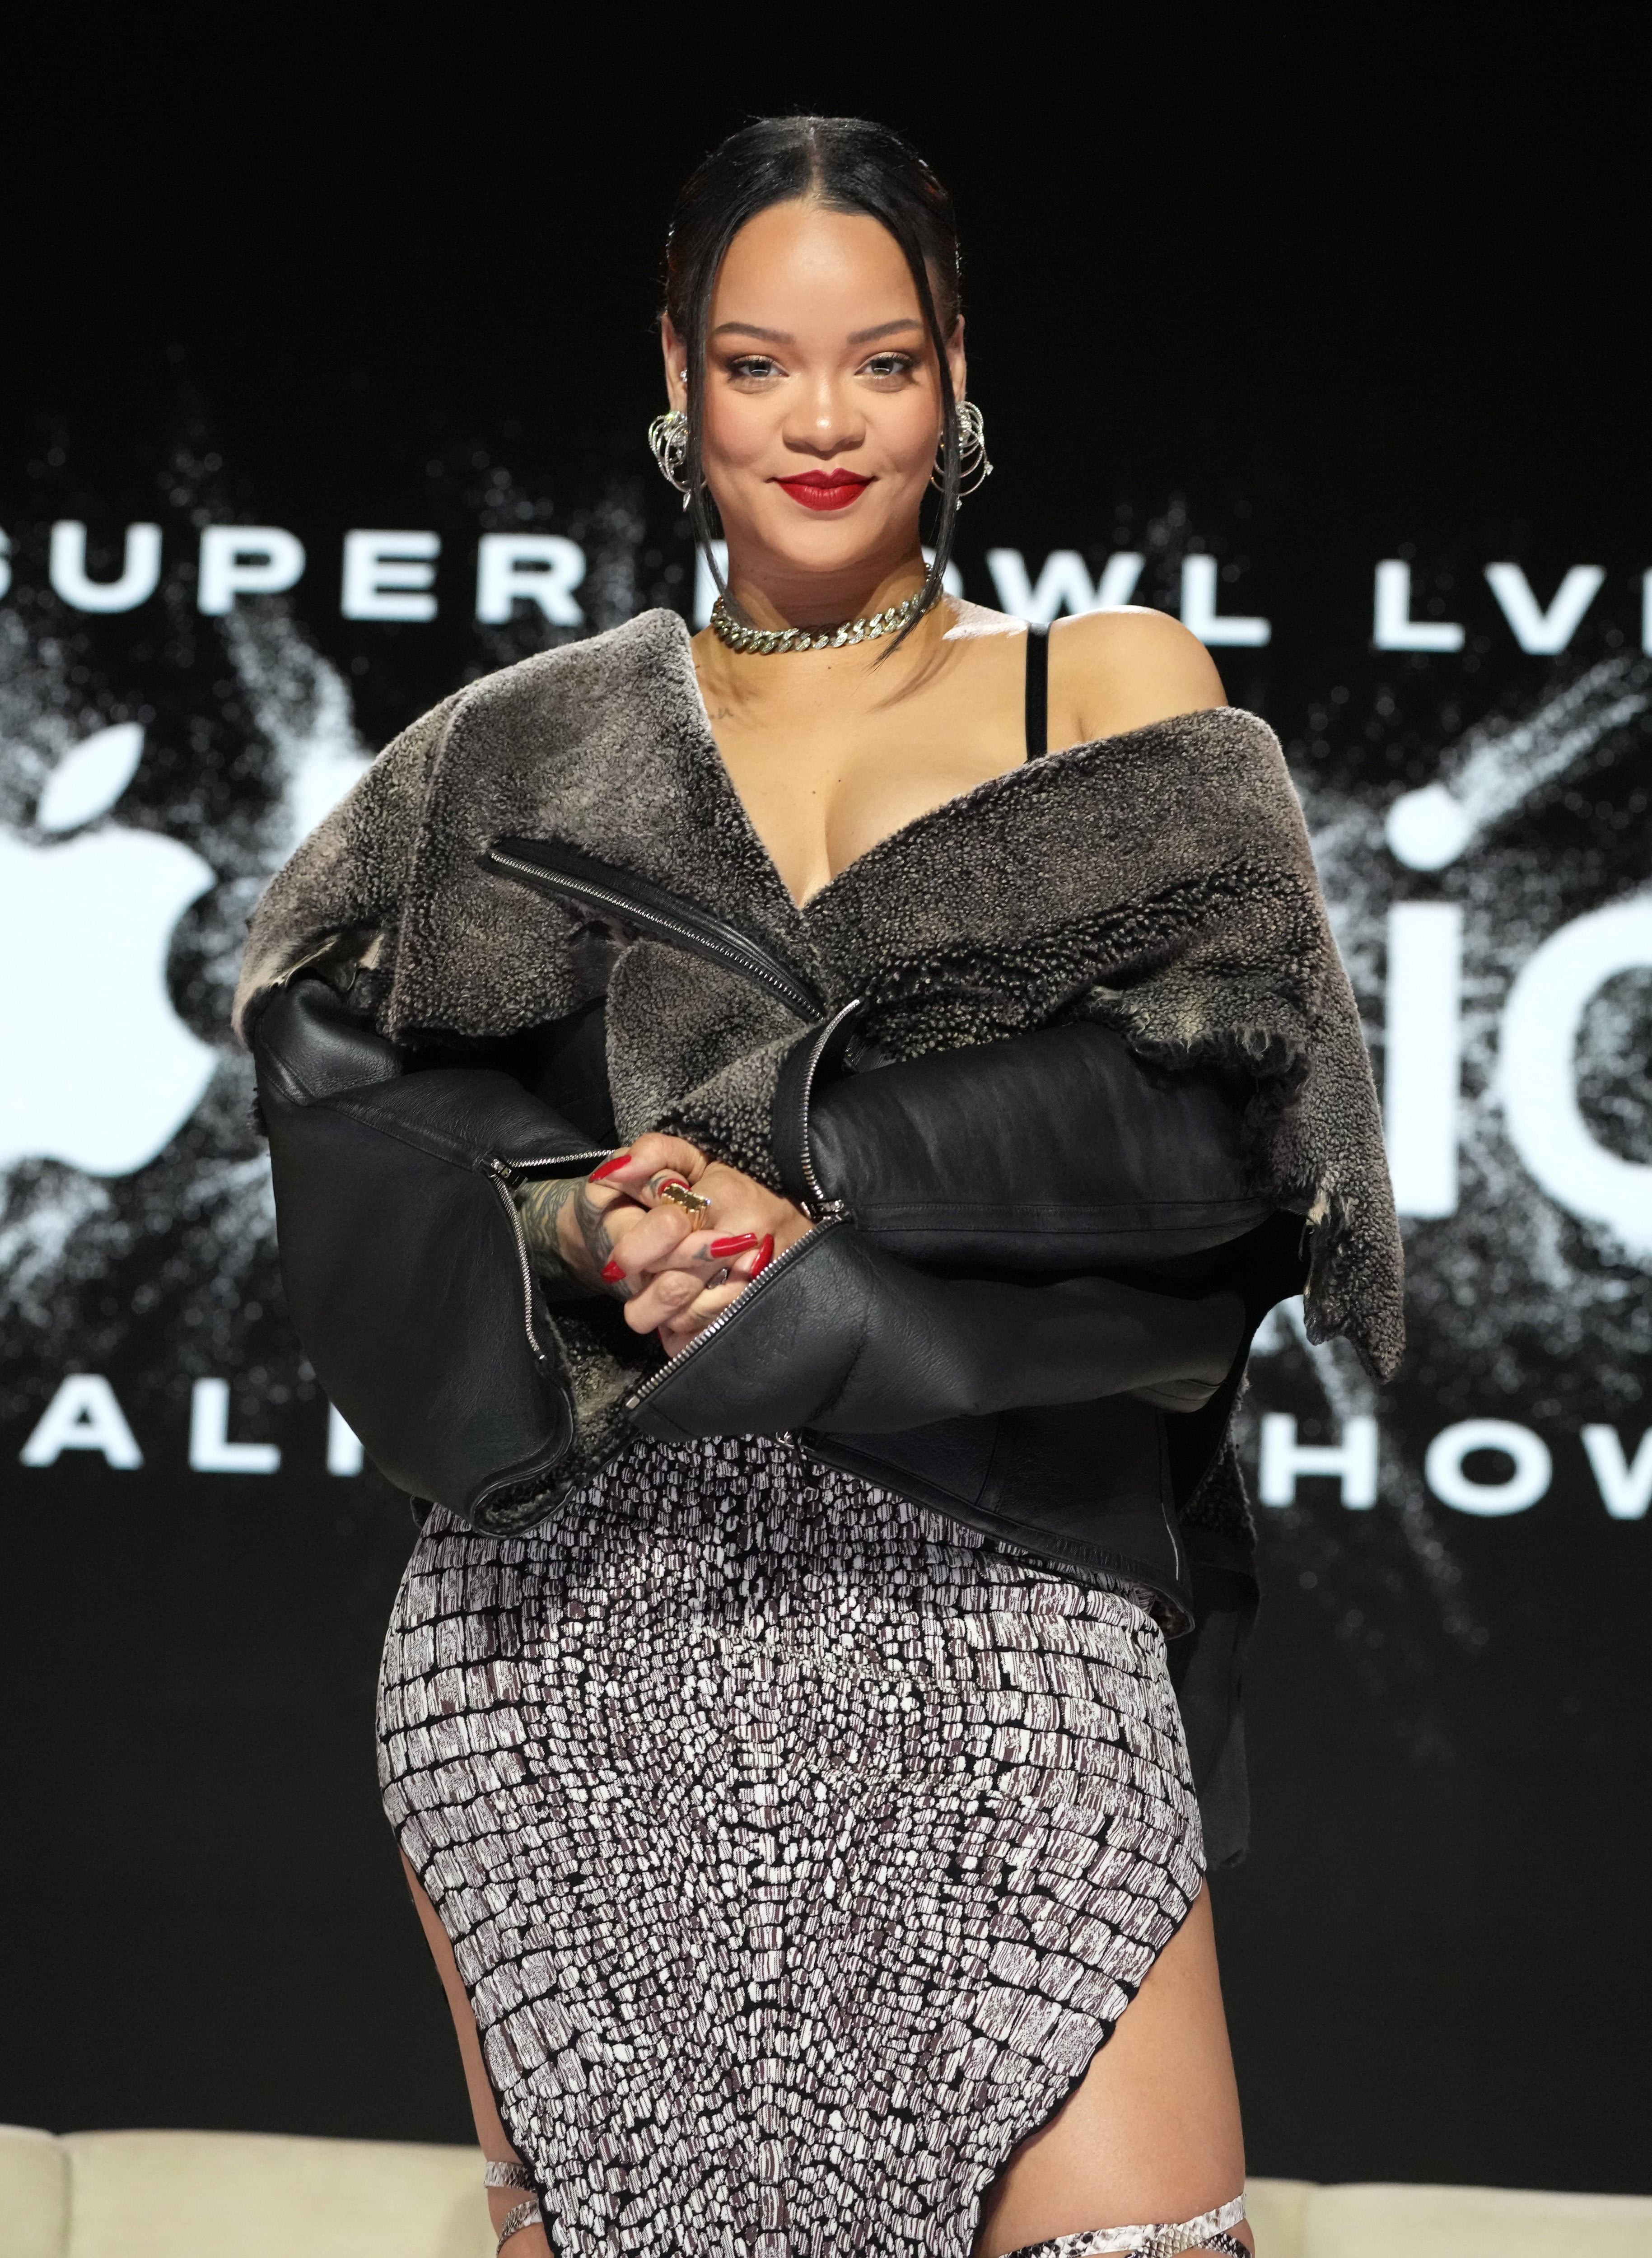 Photos of Rihanna's Style Evolution Over the Years